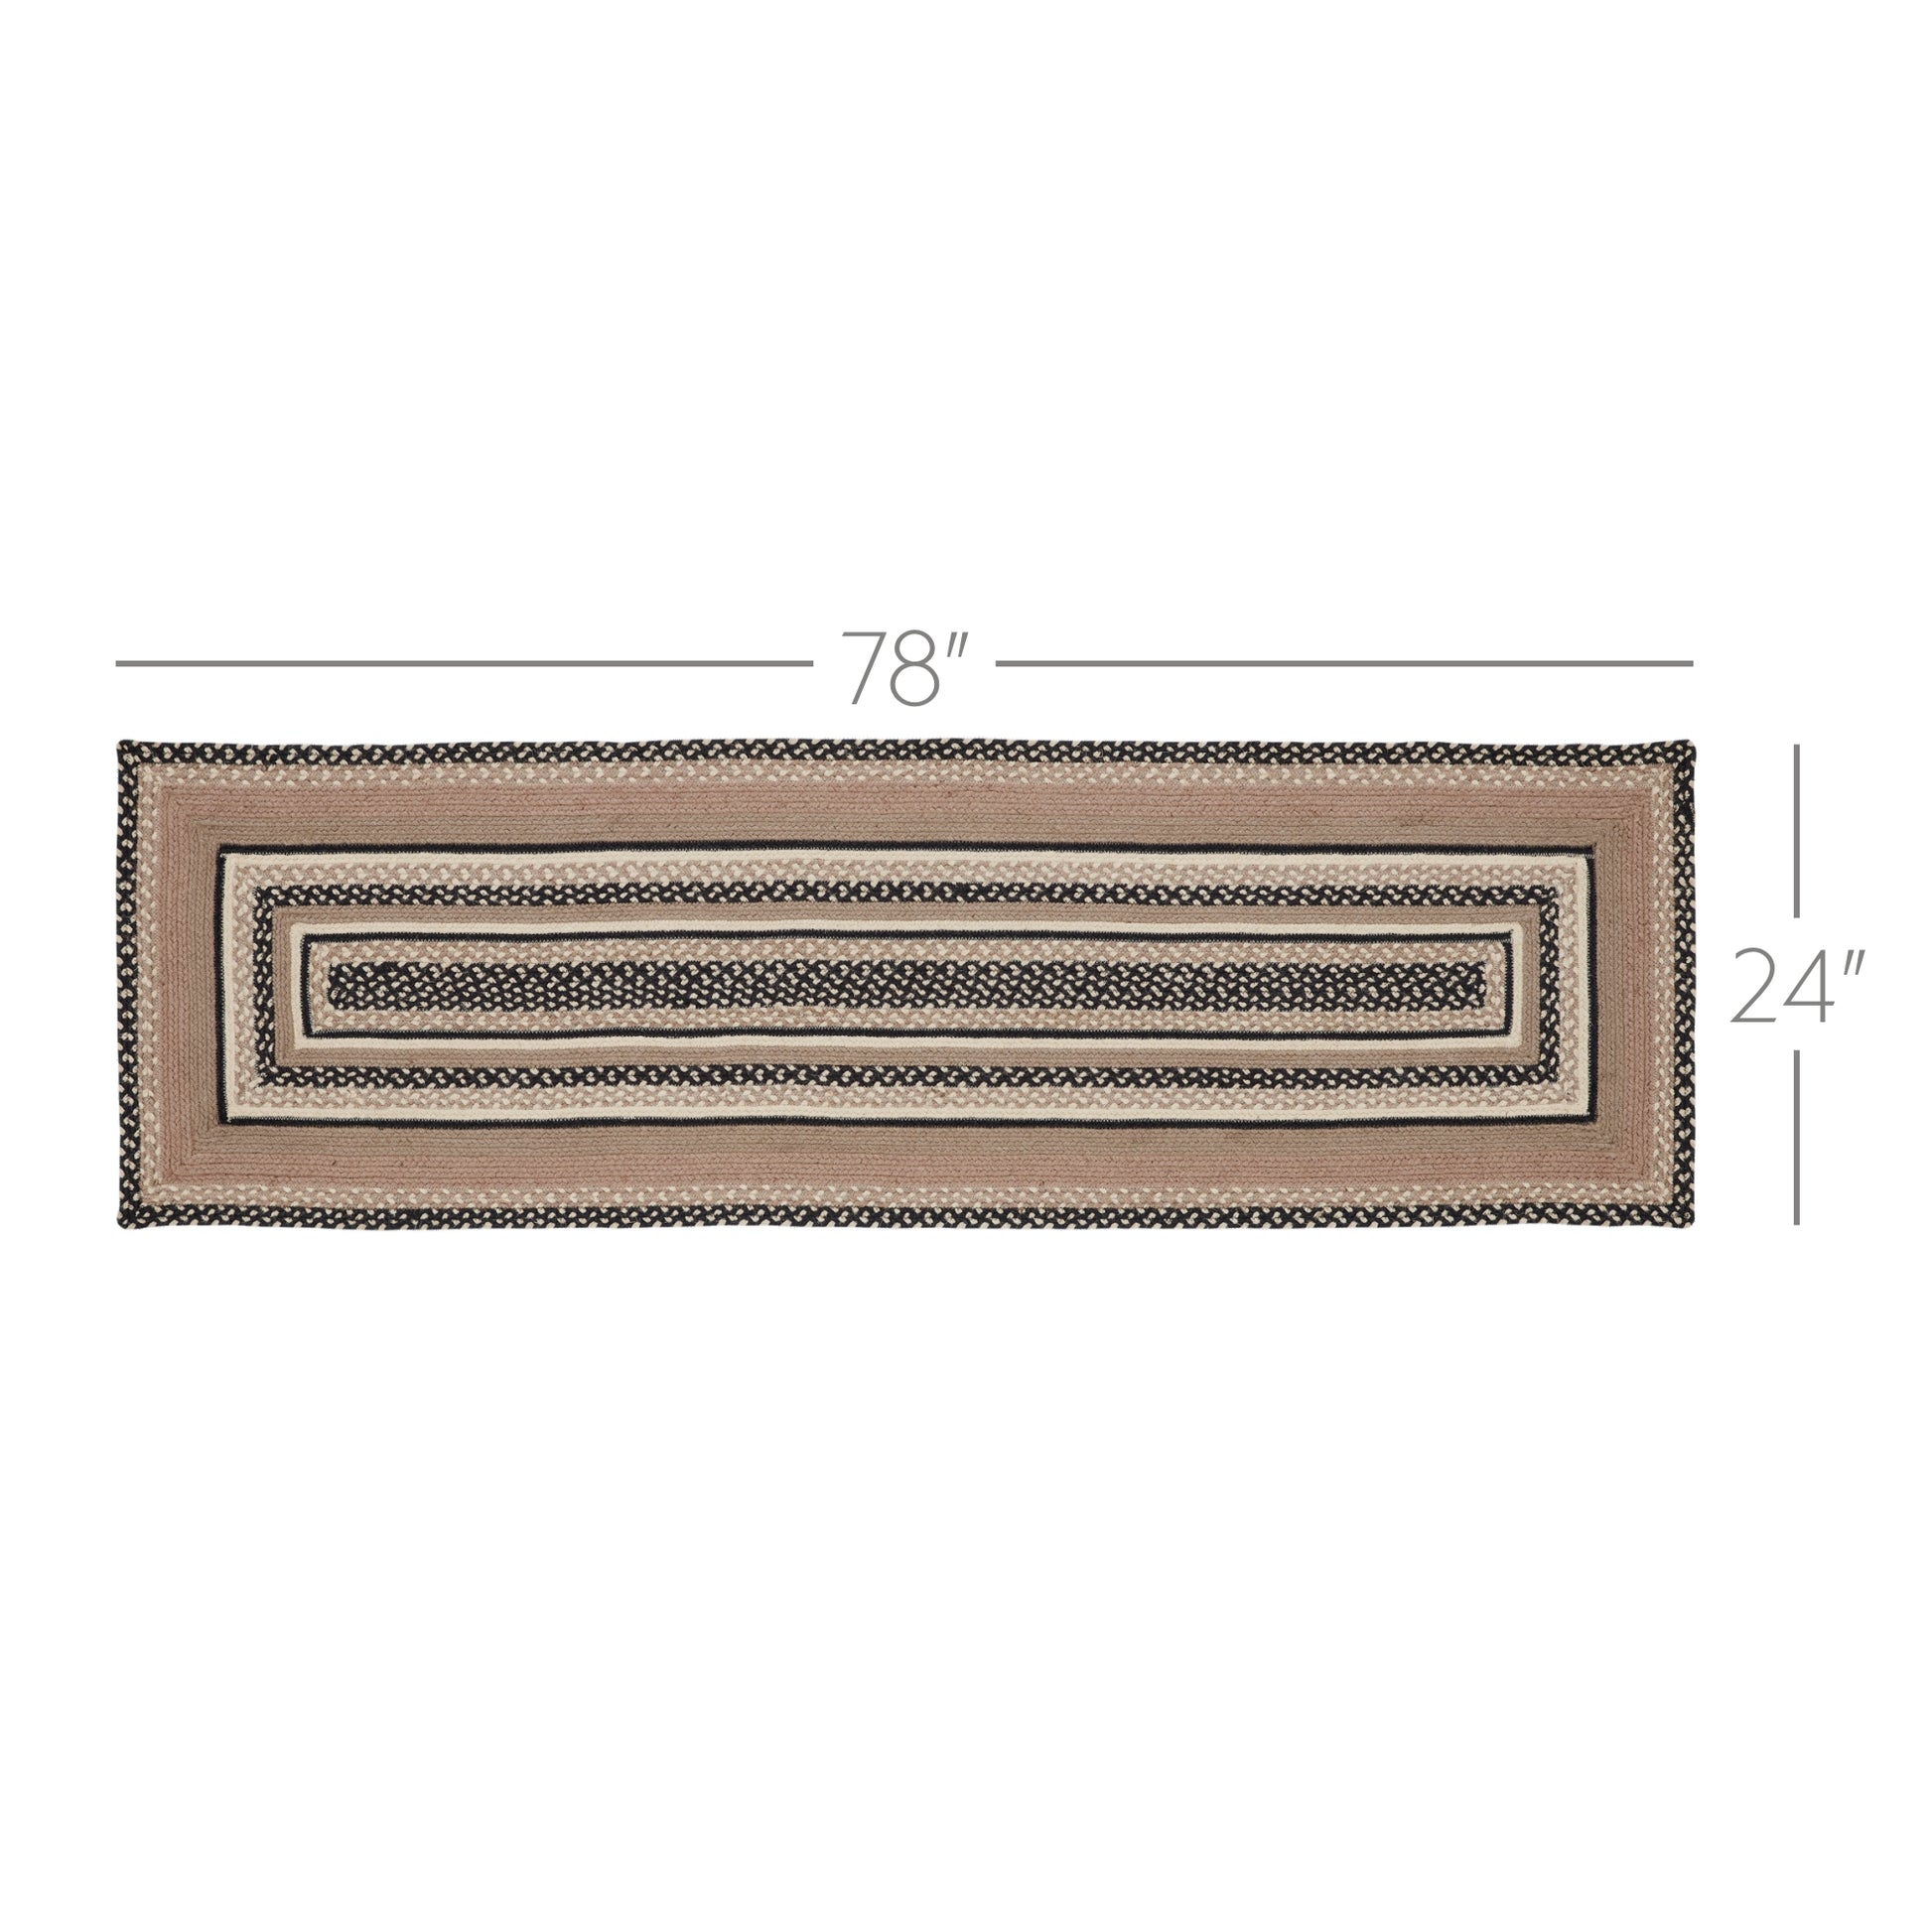 81458-Sawyer-Mill-Charcoal-Creme-Jute-Rug-Runner-Rect-w-Pad-24x78-image-2